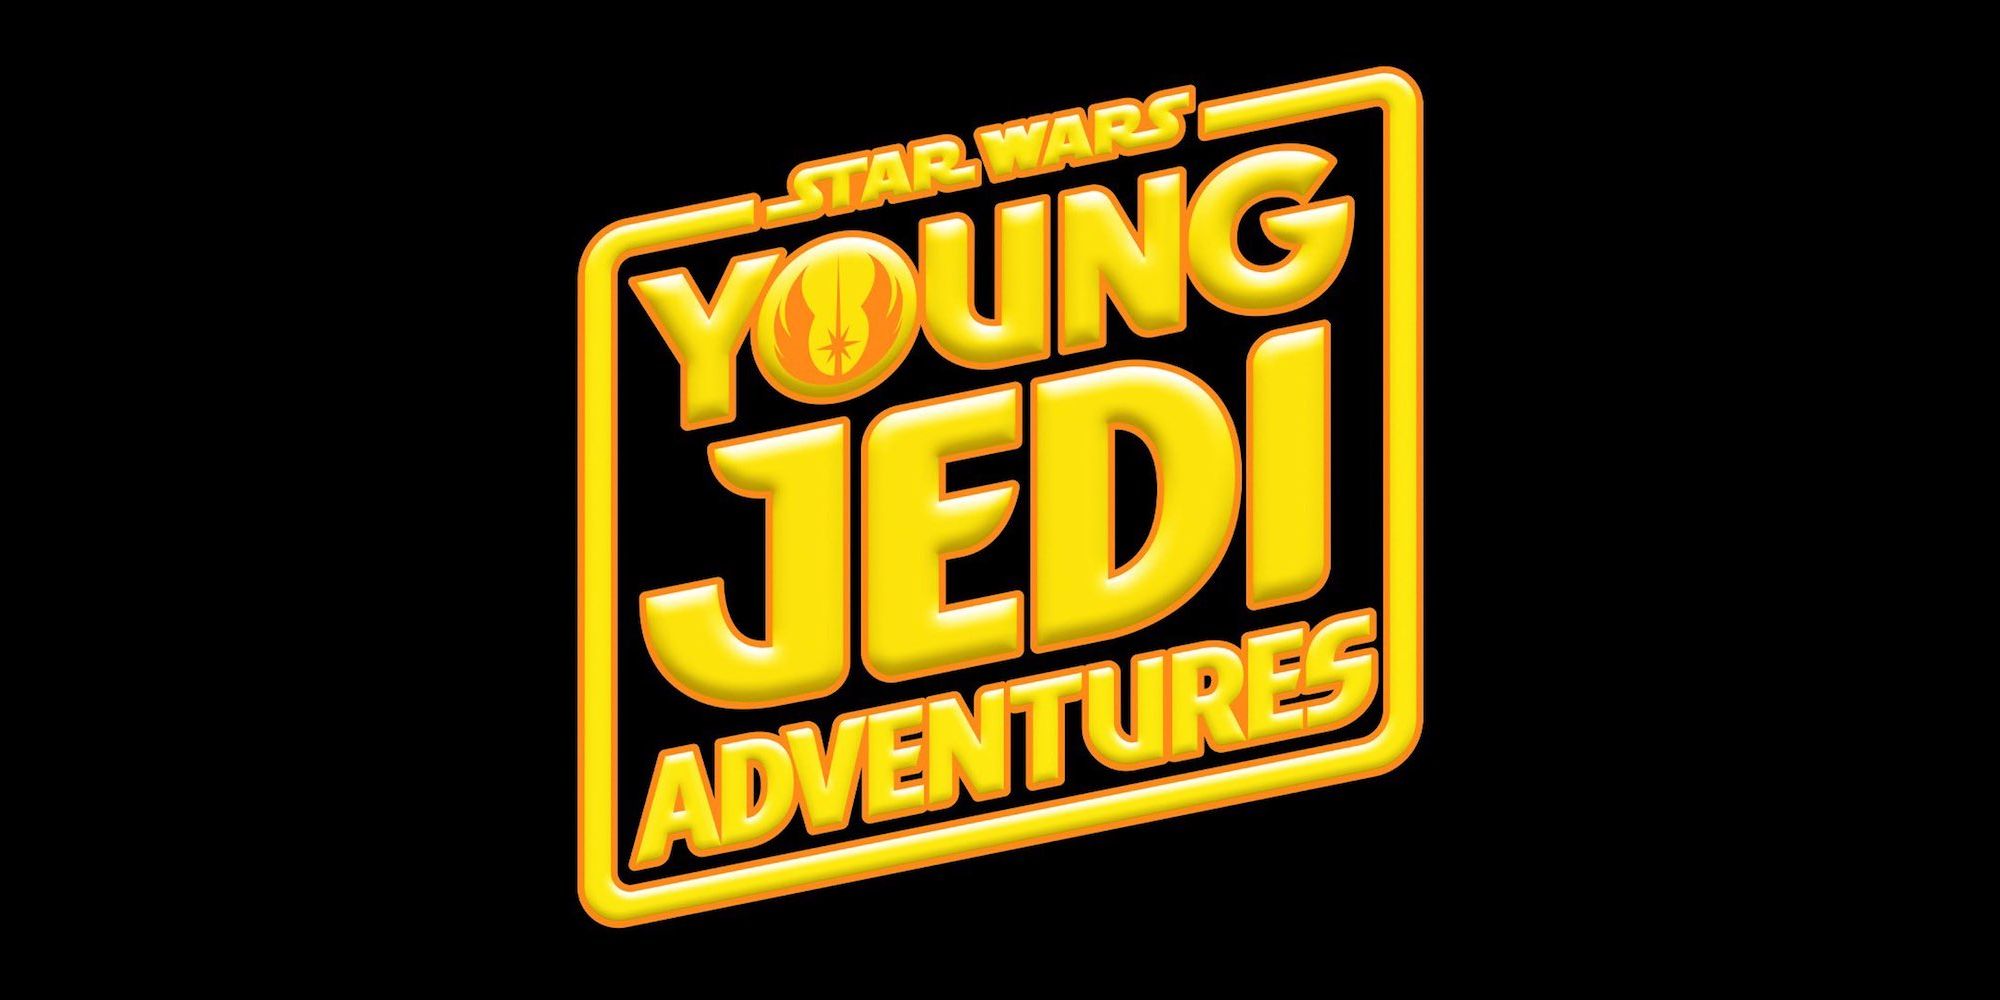 Star Wars Young Jedi Adventures Animated Series Announced for Disney+